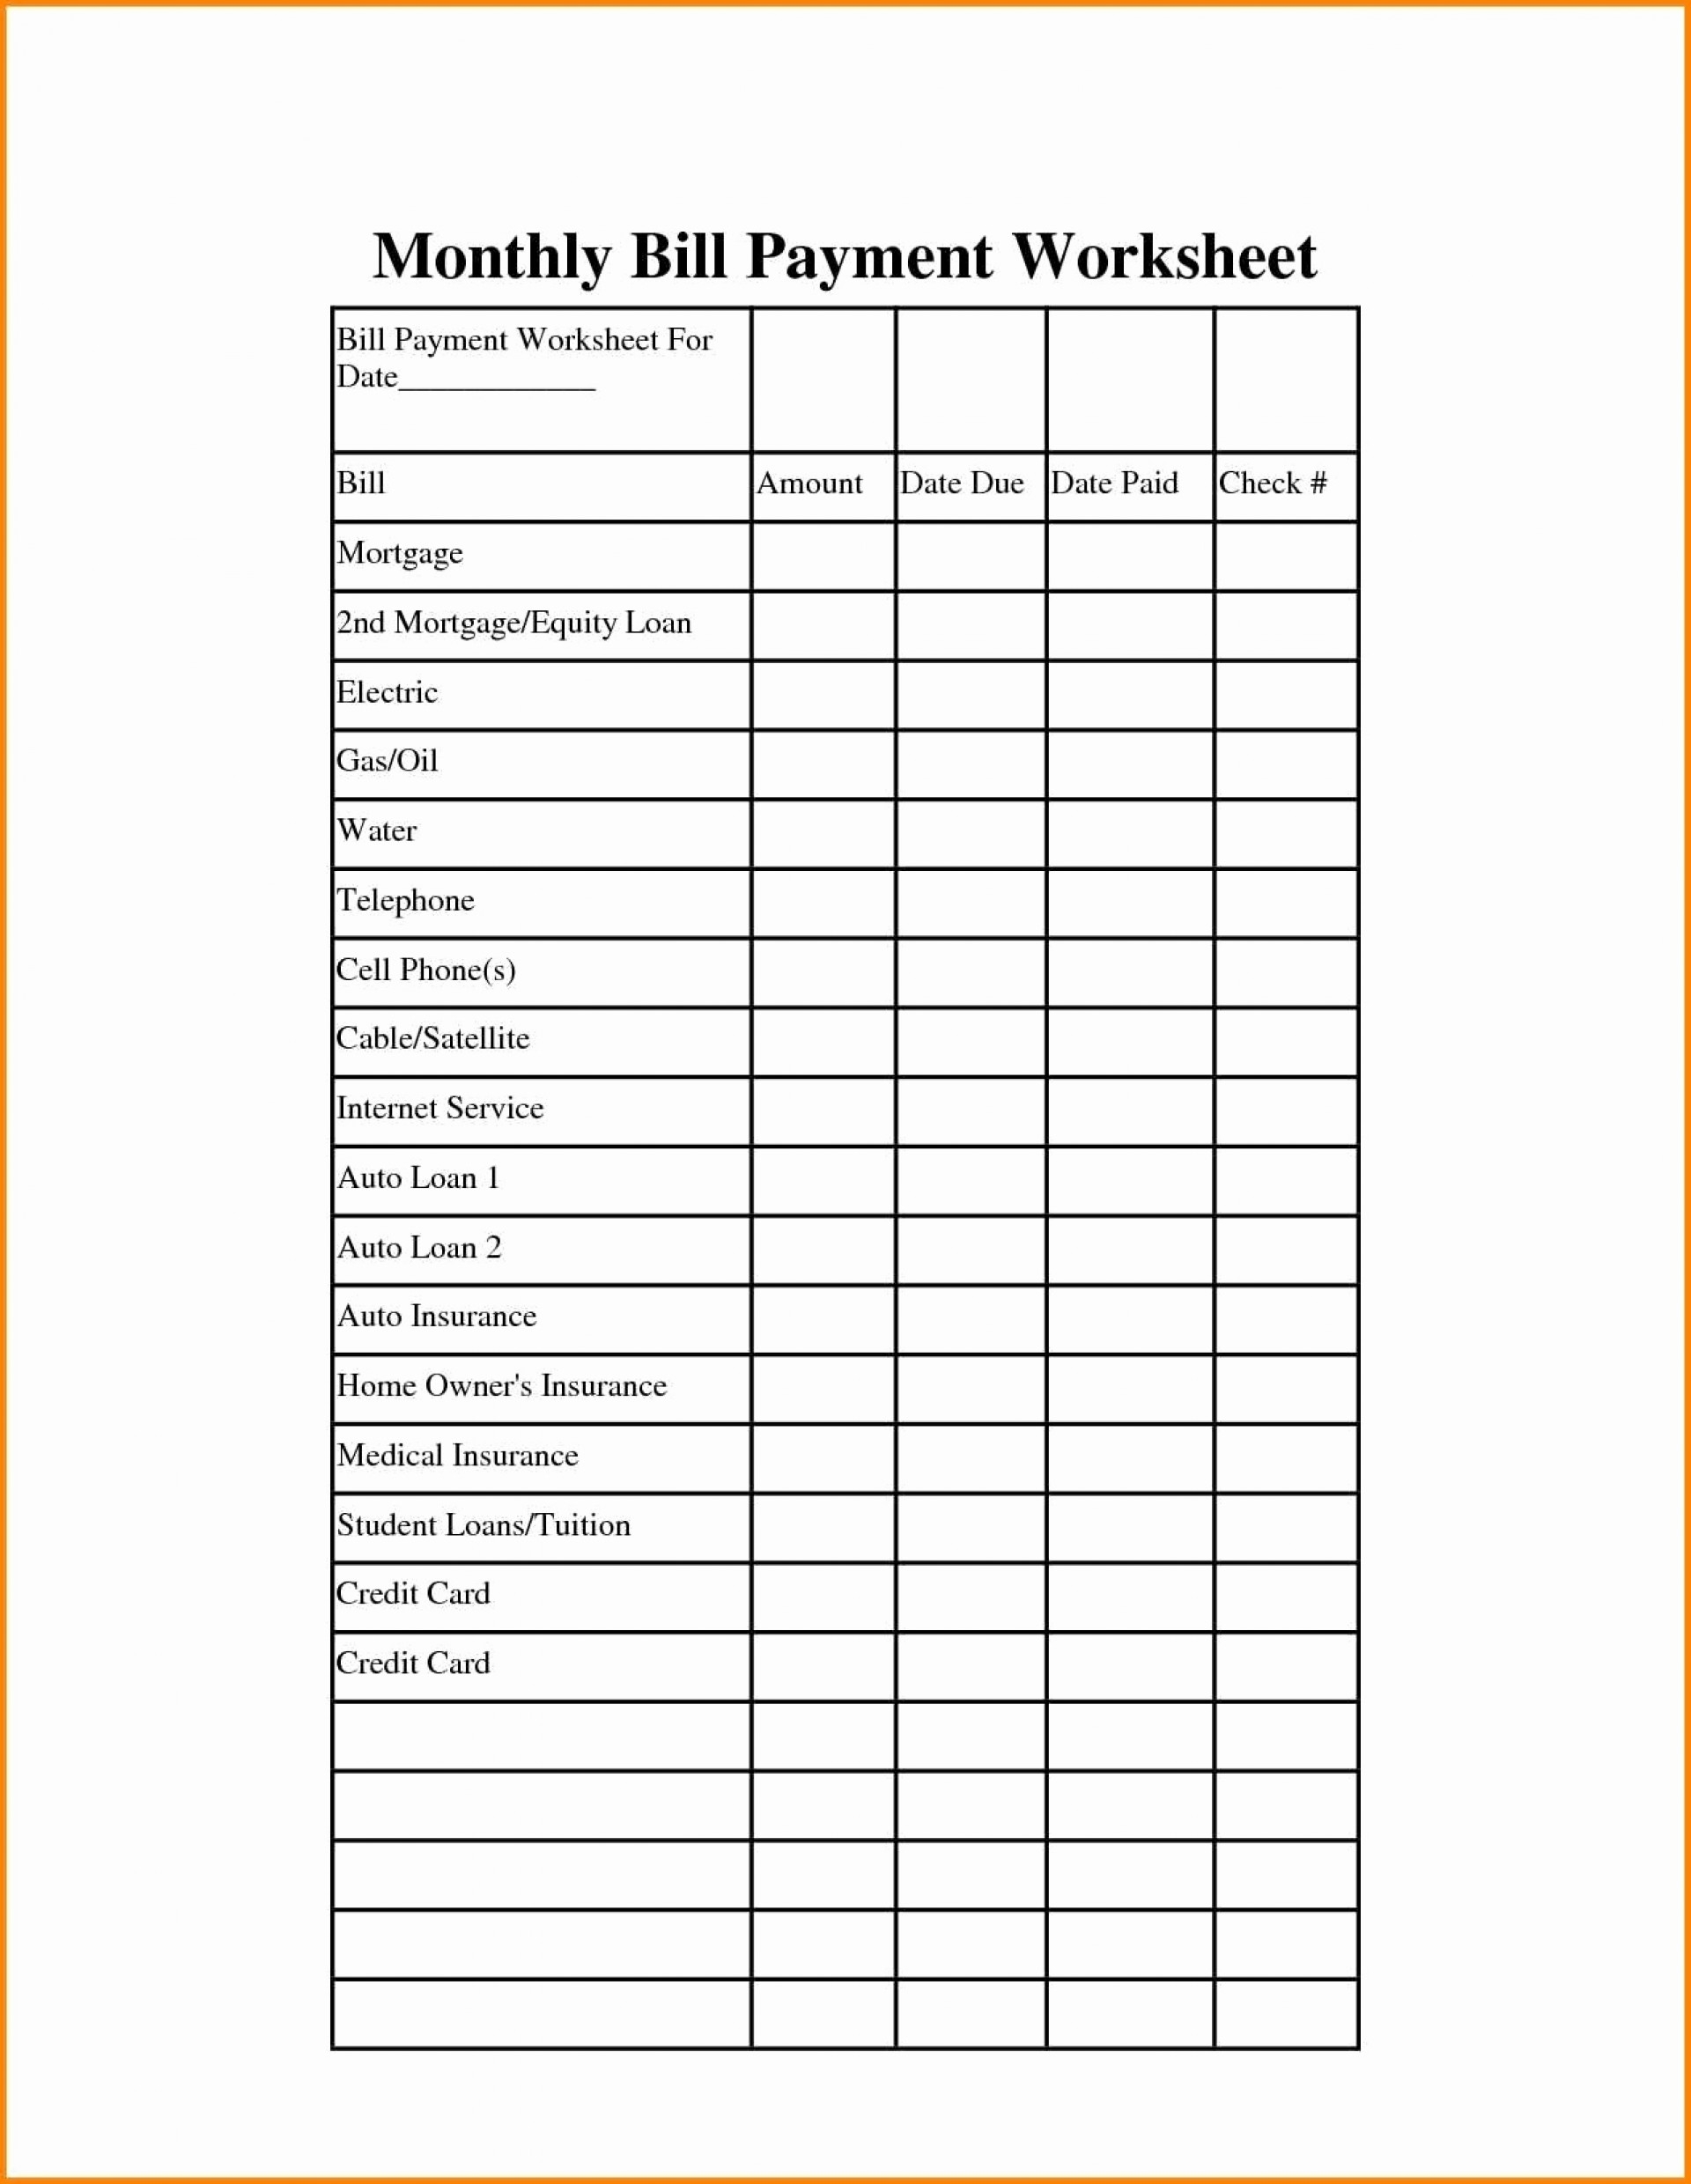 Bill Budget Spreadsheet Payment Monthly Worksheet in Custom Worksheet Monthly Bill Payment